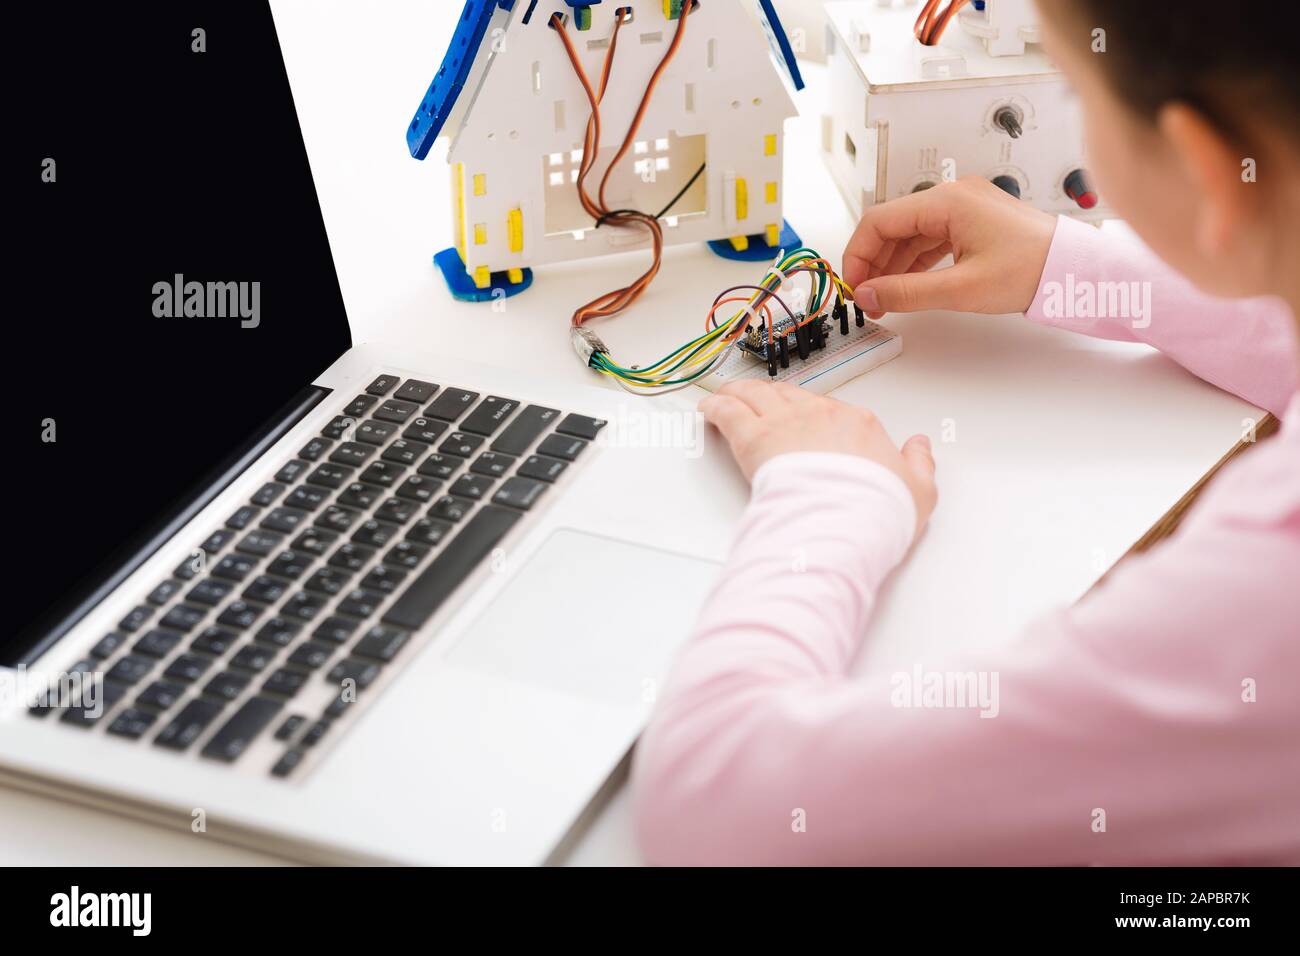 Girl constructing robot and programming it on laptop Stock Photo